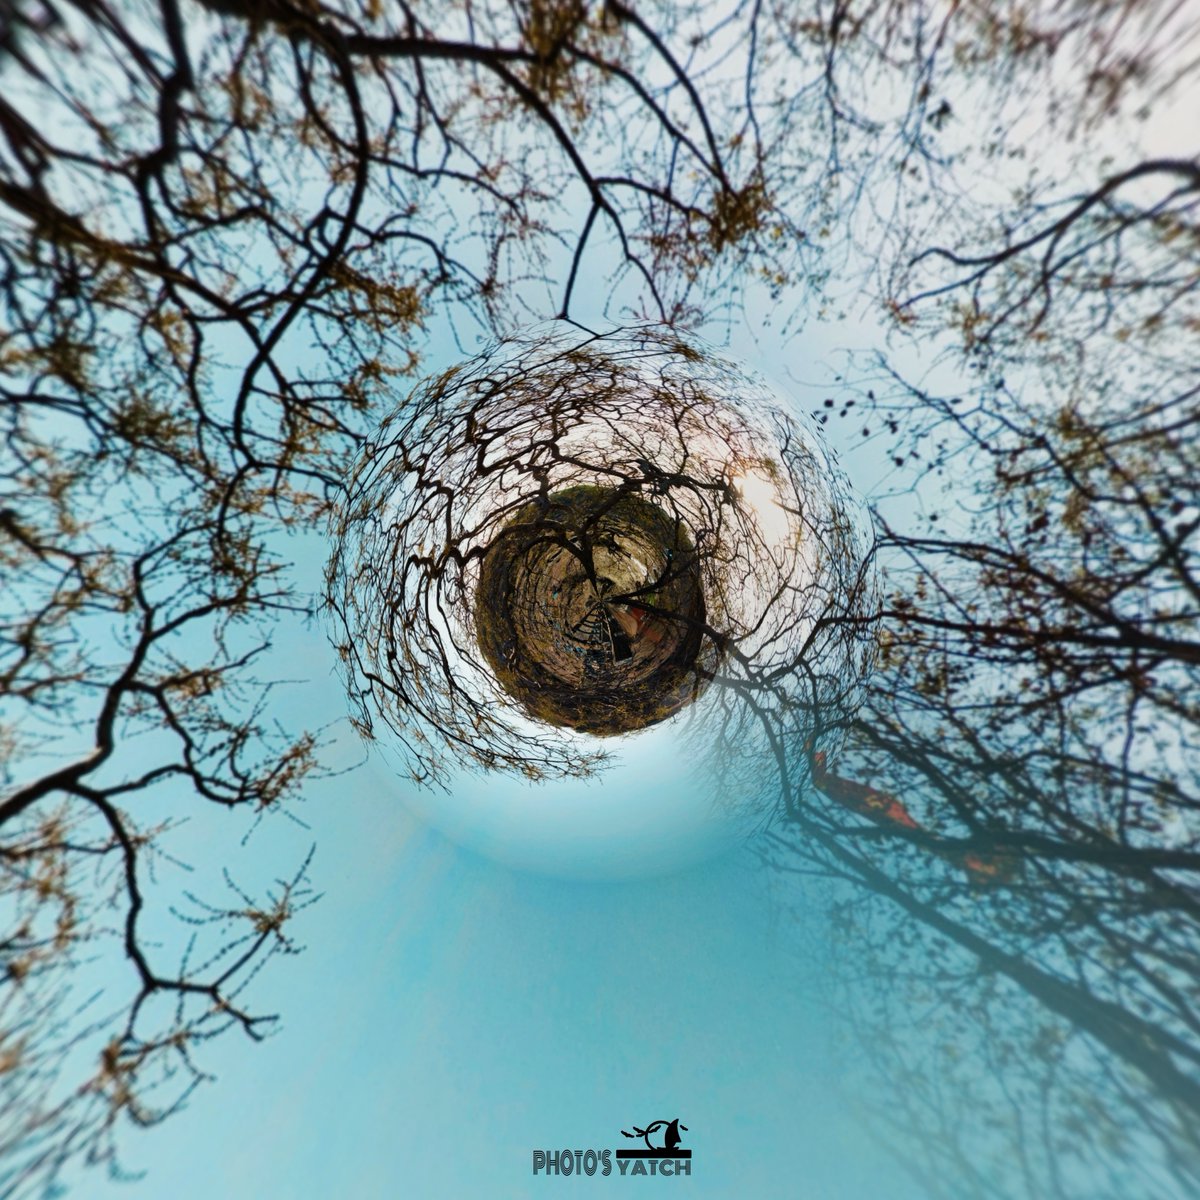 Beyond reality there is another dimension which can be seen by crazy peoples only 😎🌀 . . #picoftheday #NaturePhotography #nature #NatureBeauty #naturelovers #trees #creativity #quoteoftheday #TweetDeck #wanderlust #travelphotography #Travel #Peace